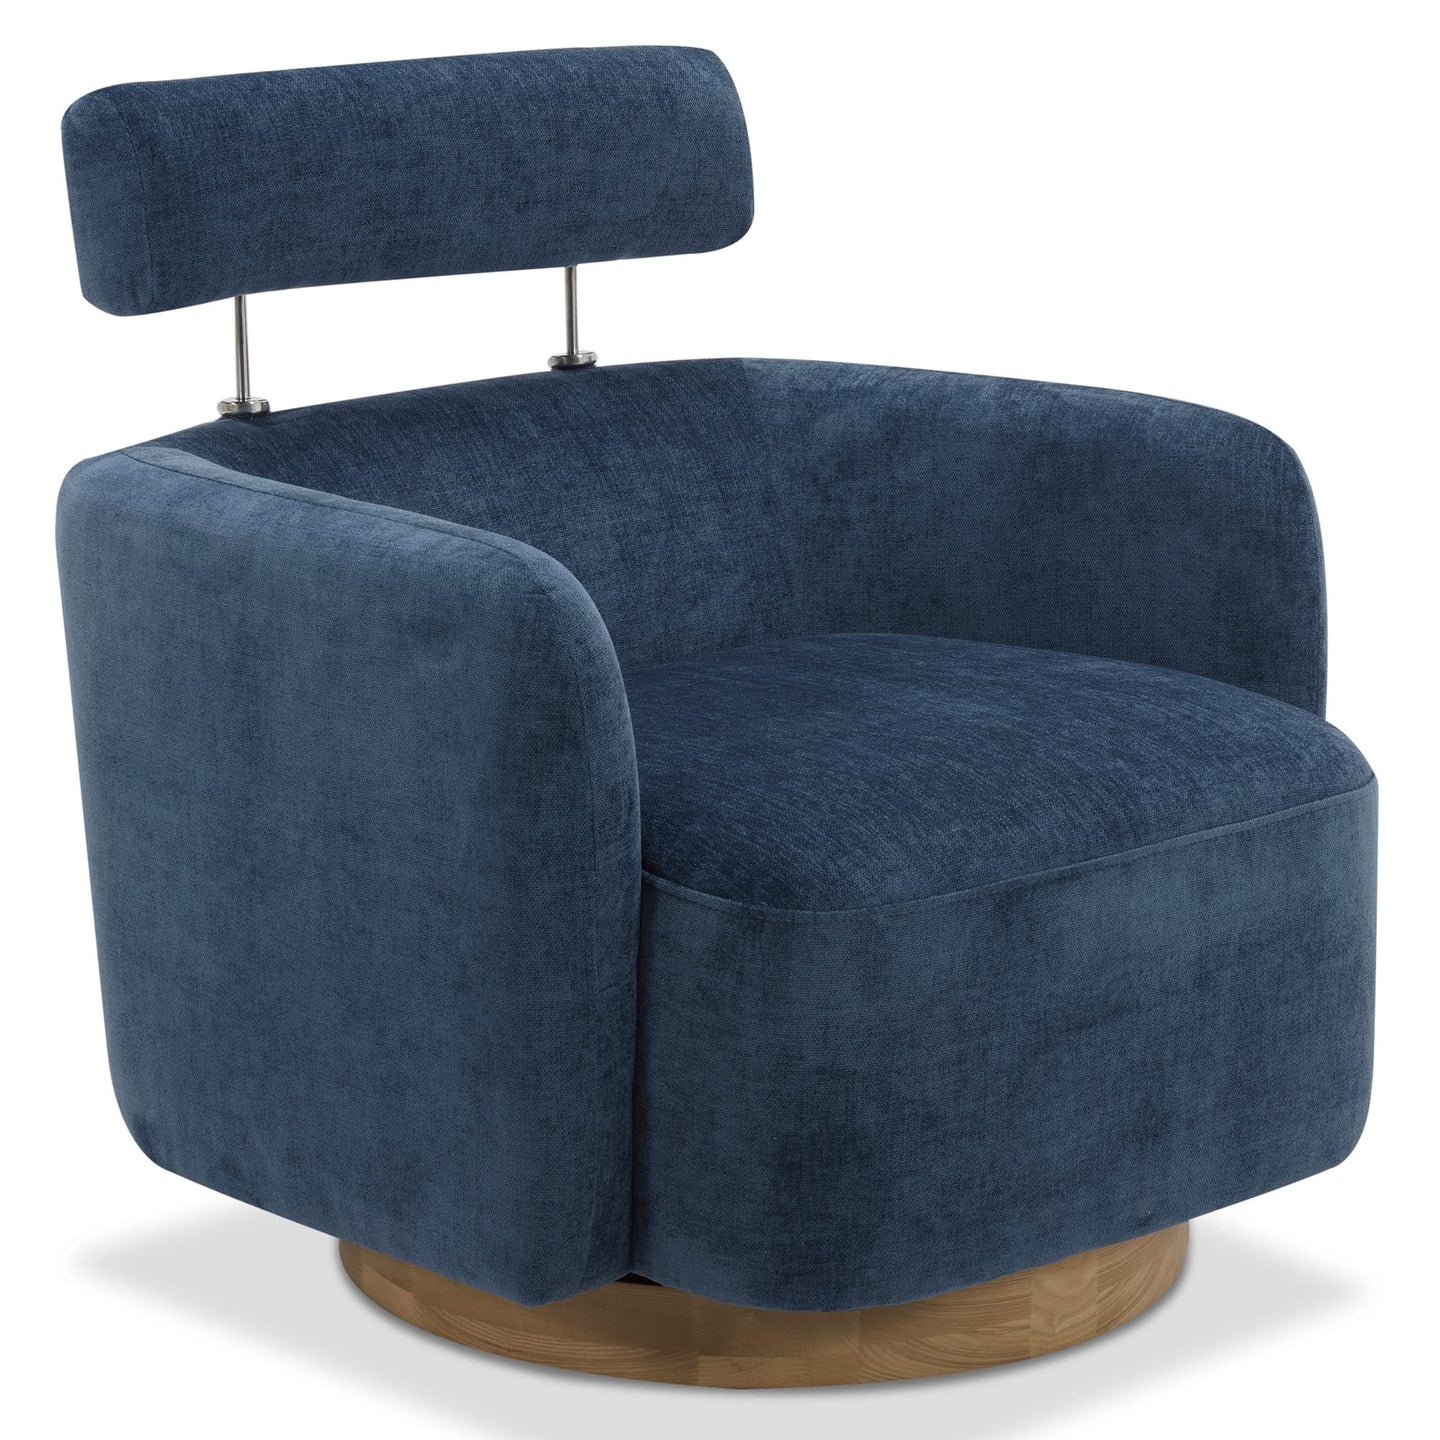 CHITA Swivel Accent Chair Armchair, Barrel Chair with Adjustable Backrest for Living Room Bedroom, Blue